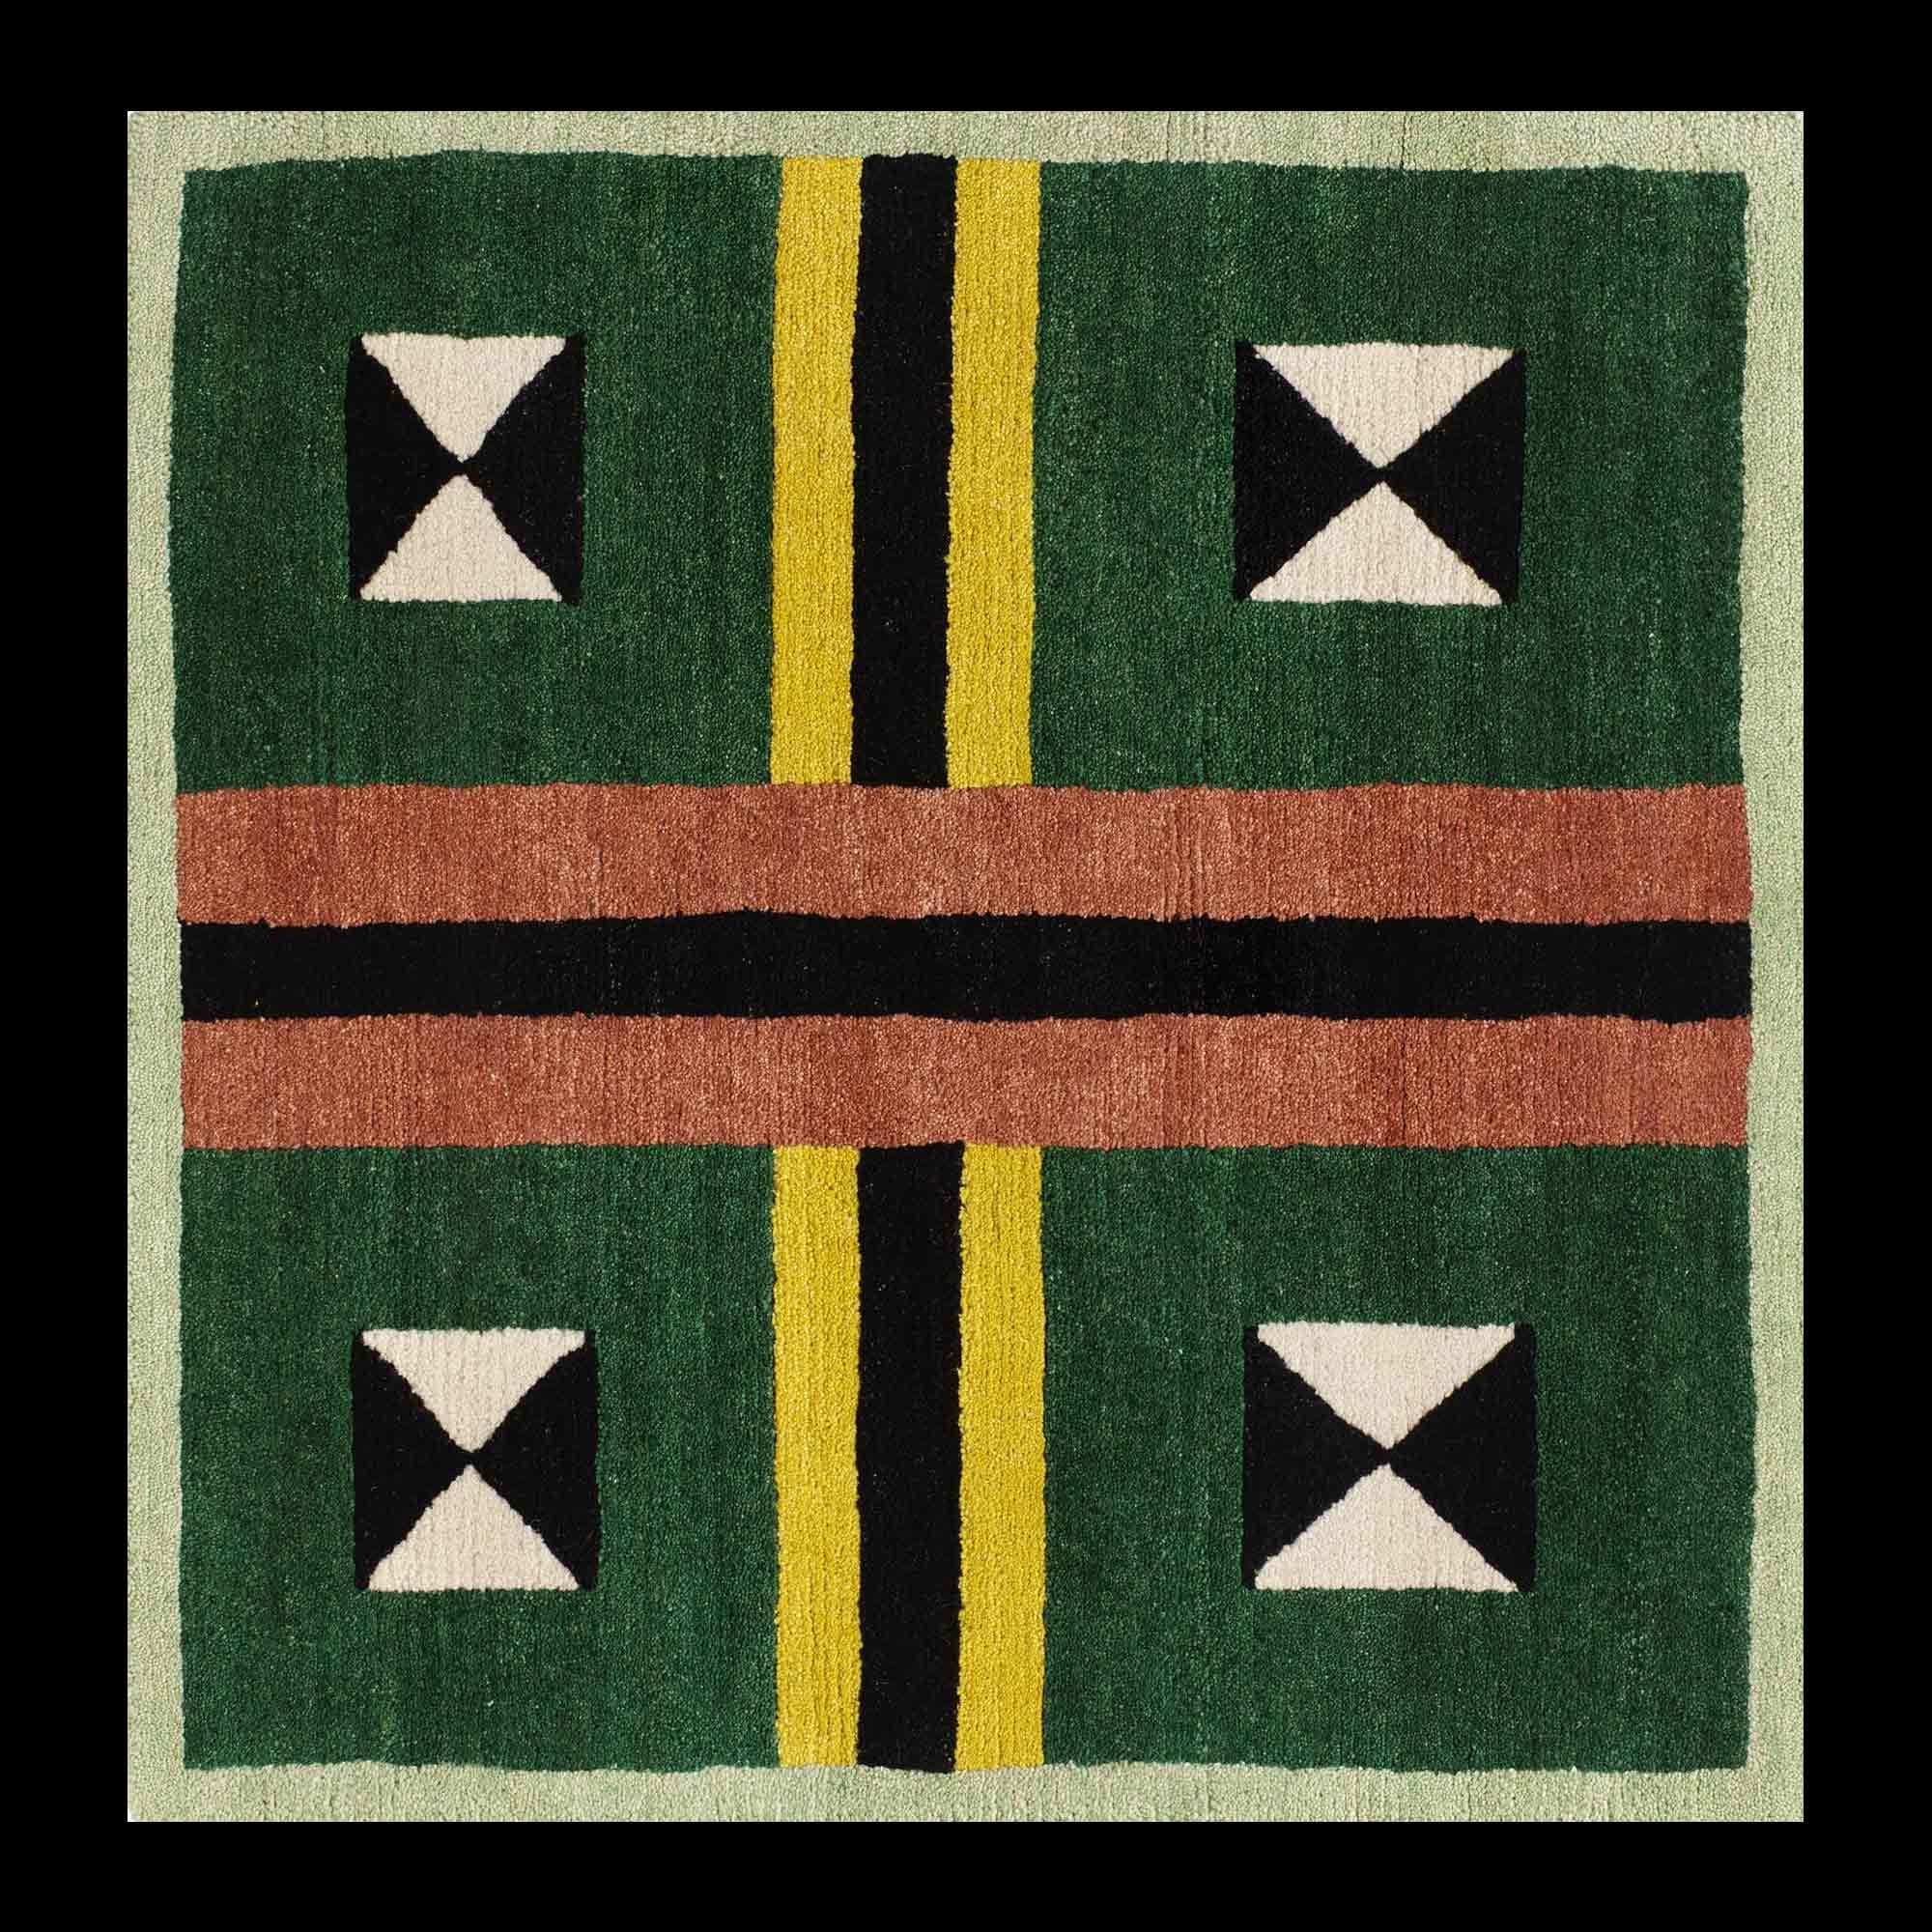 NDP24 woollen carpet by Nathalie Du Pasquier Post Design collection/Memphis

A woollen carpet handcrafted by different Nepalese artisans. Made in a limited edition of 36 signed, numbered examples.

As the carpet is made by hand, there are slight